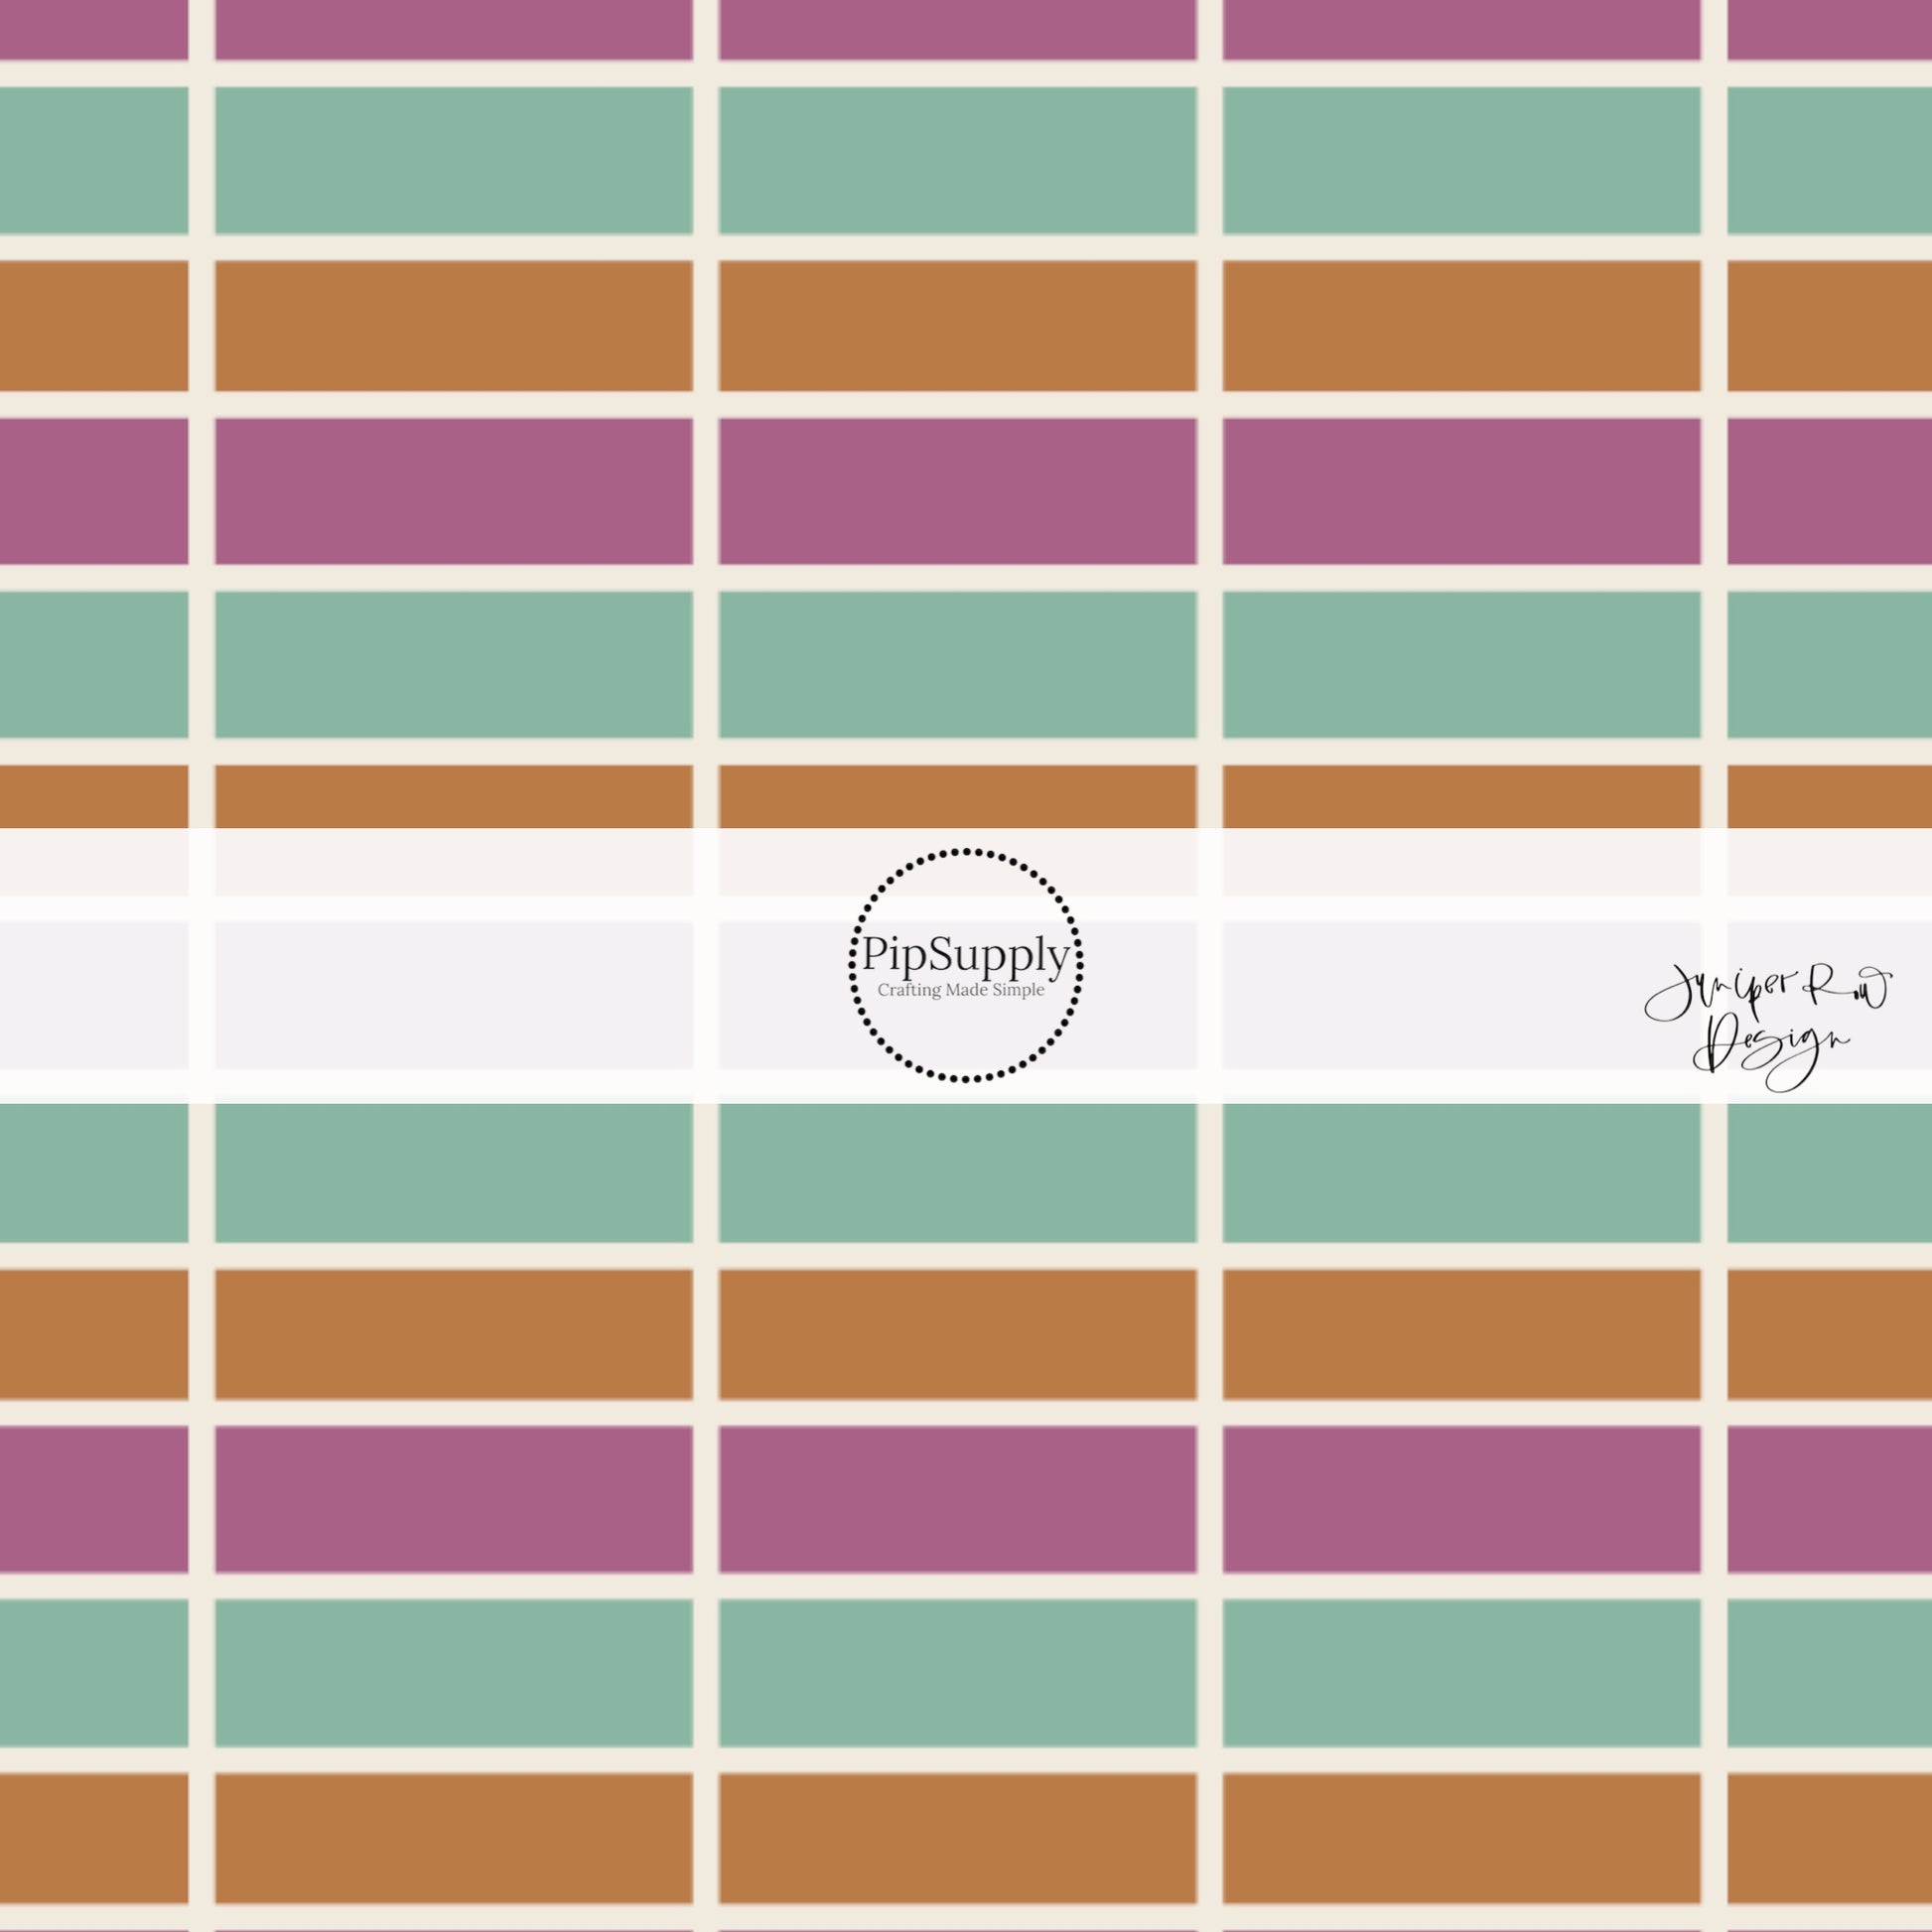 Orange, Plum, and teal, colored tiles fabric swatch